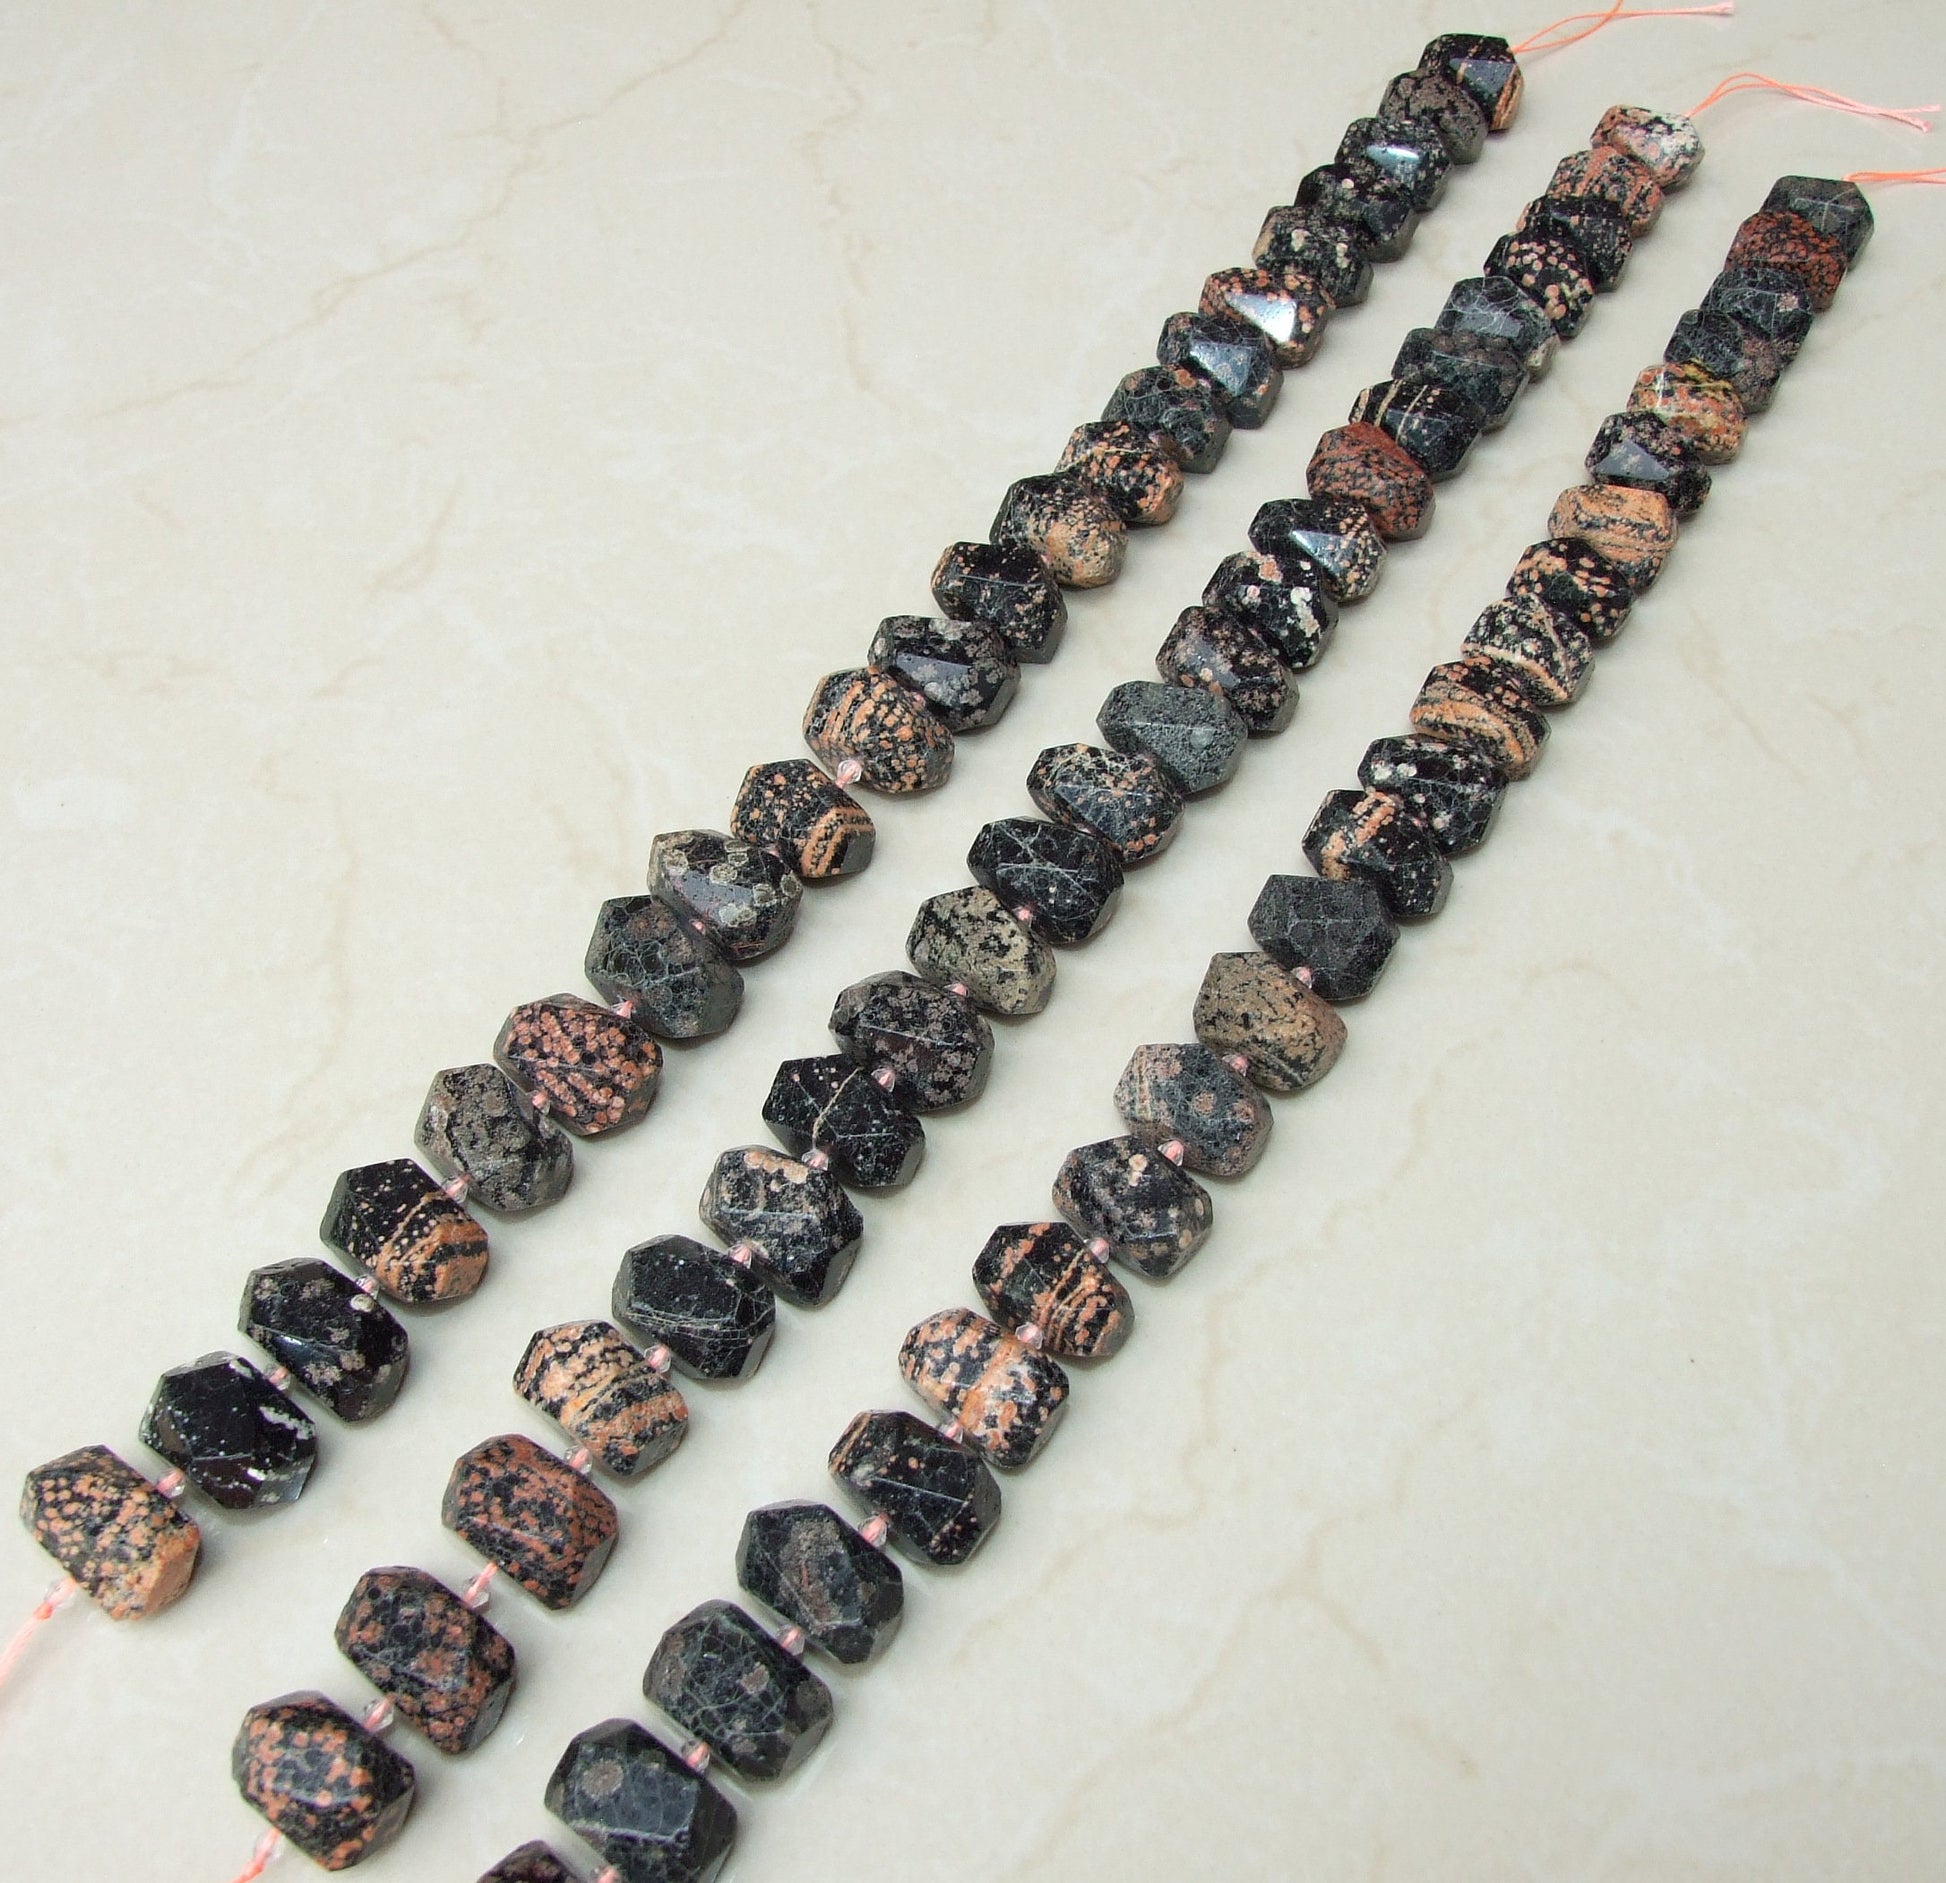 Snowflake Obsidian Faceted Nugget, Polished Obsidian Pendant, Gemstone Beads, Jewelry Stones, Obsidian Beads, Half Strand 13mm x 15mm x 23mm